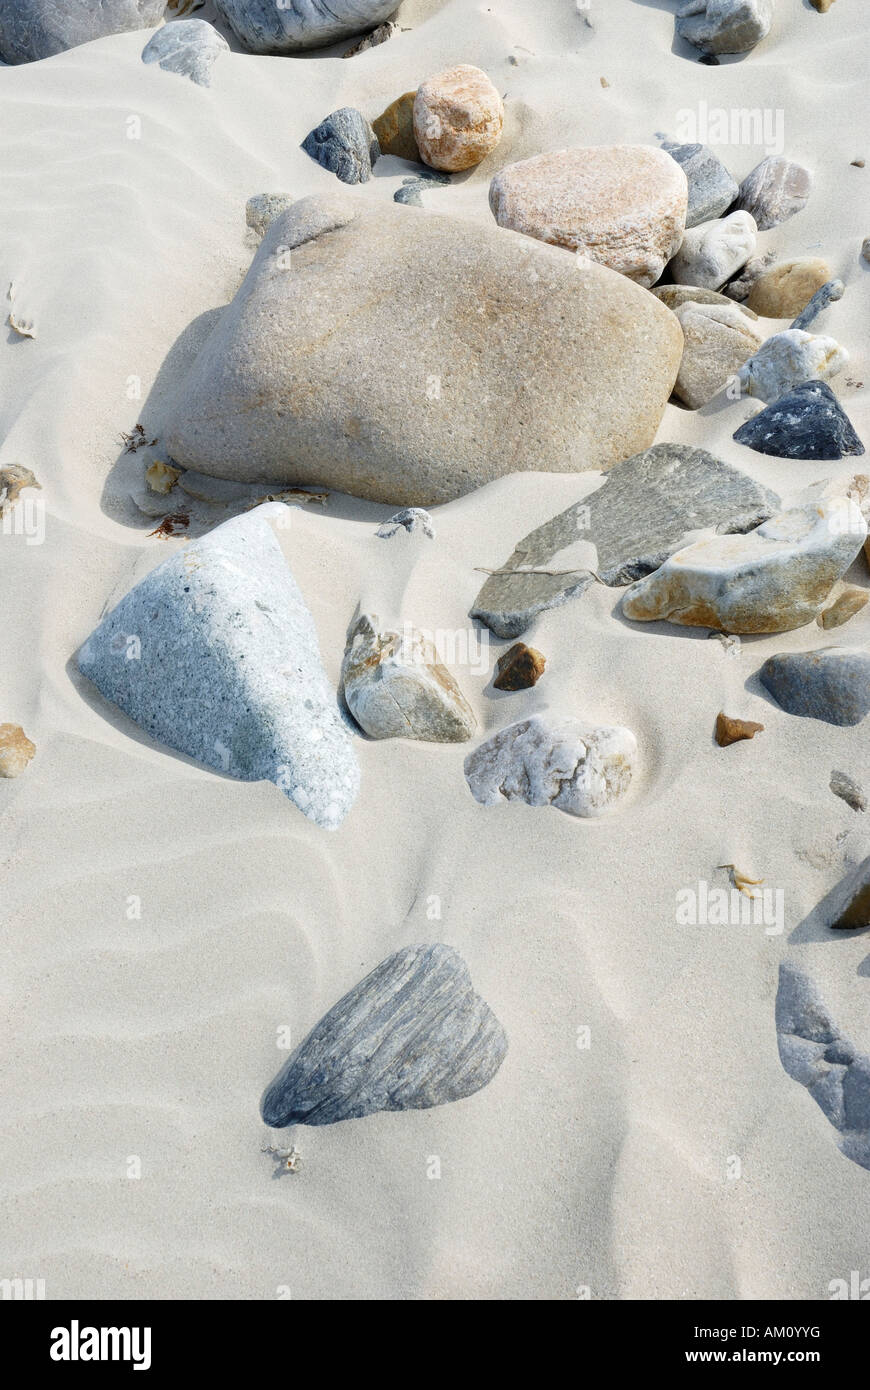 Pebbles of different geological origins polished by wind and sand laying in sand bed Stock Photo